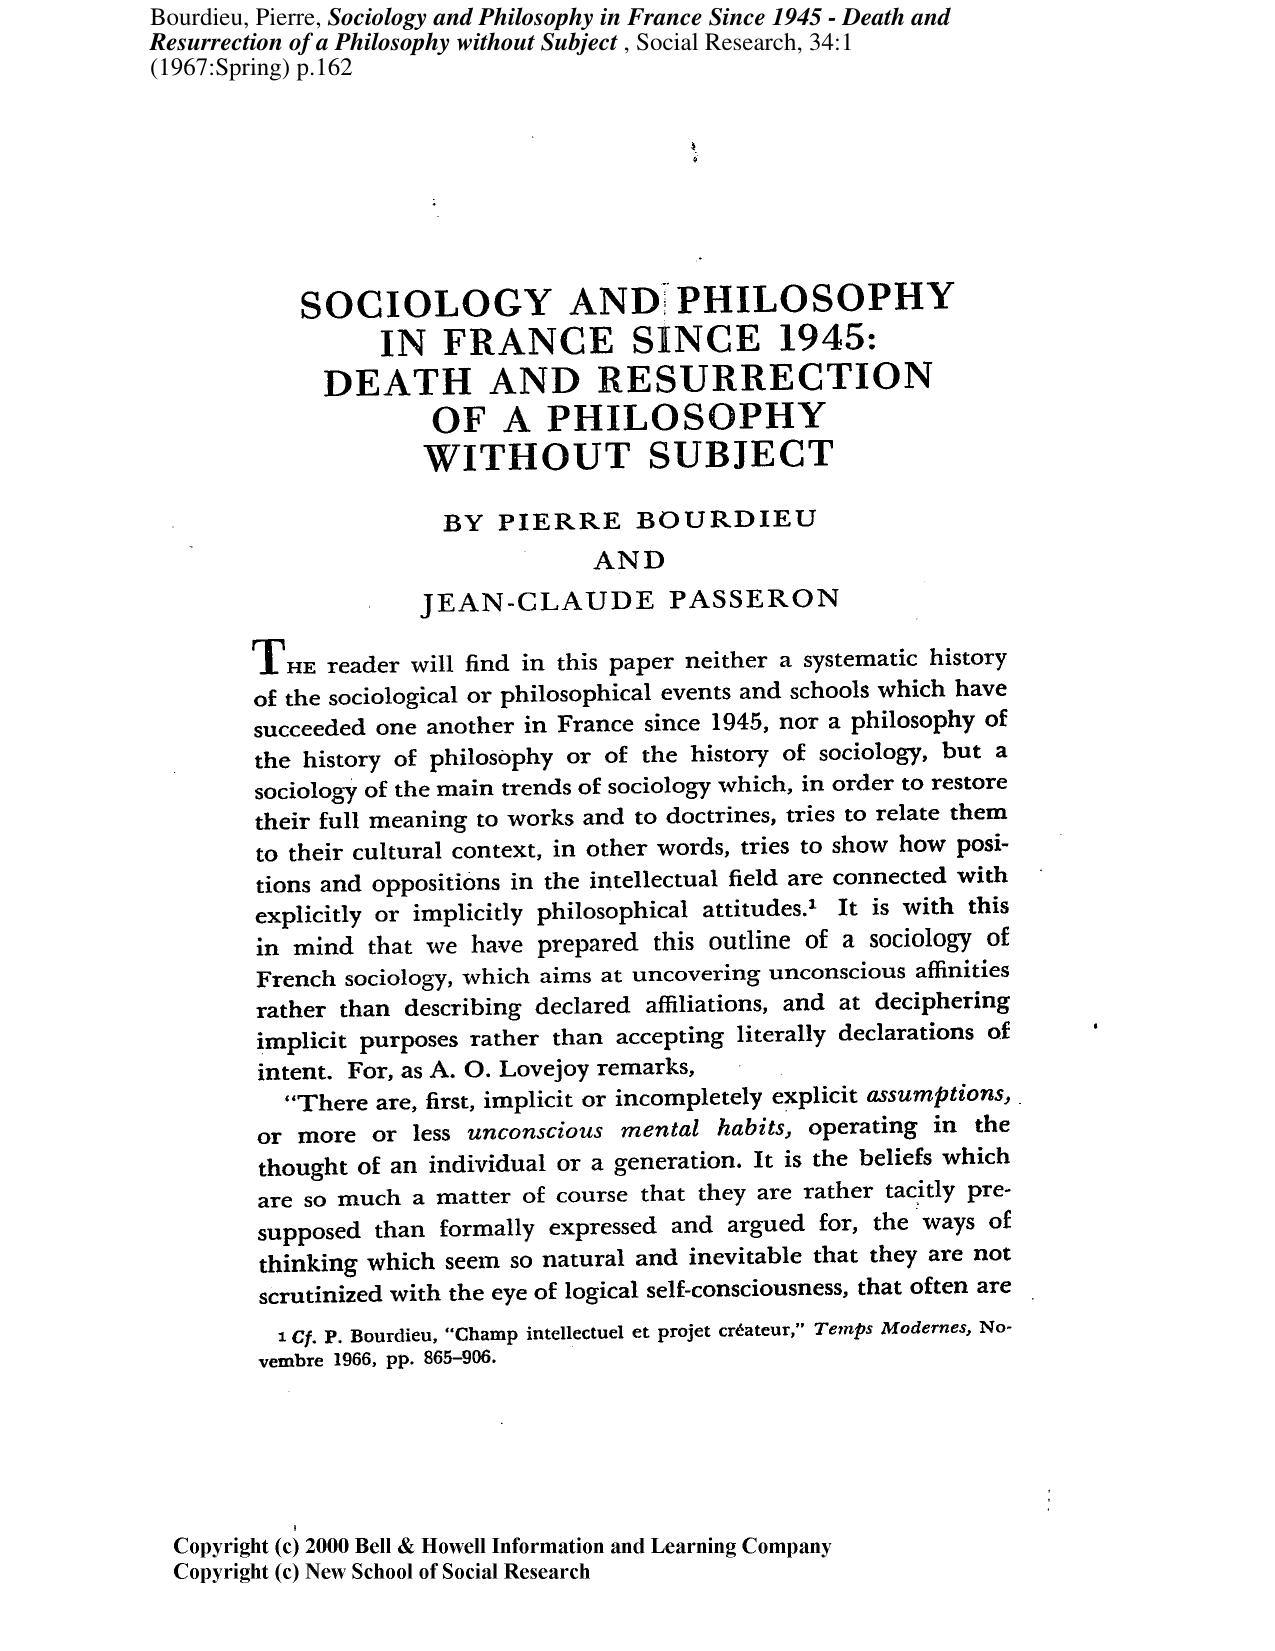 Sociology And Philosophy In France Since 1945 - Death And Resurrection Of A Philosophy without Subject